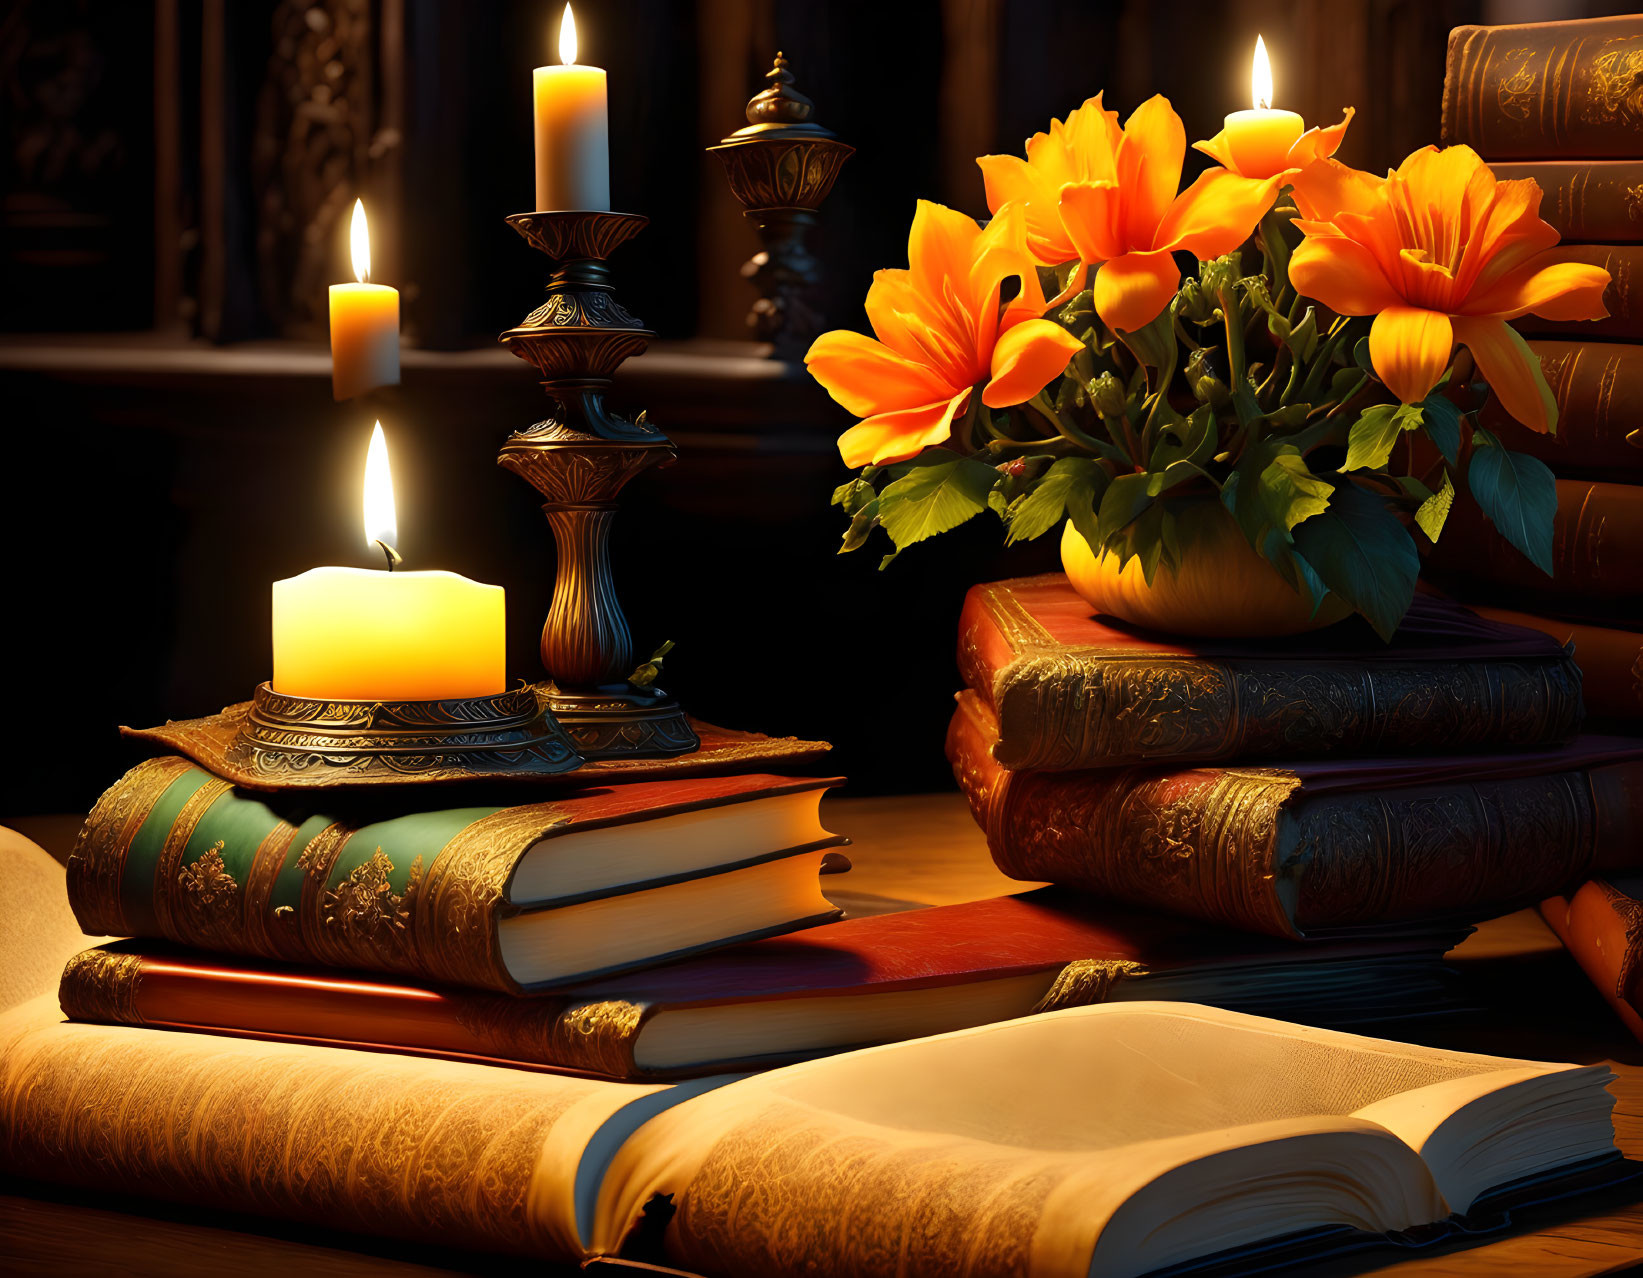 Tranquil setting with candles, orange flowers, and antique books on wooden table